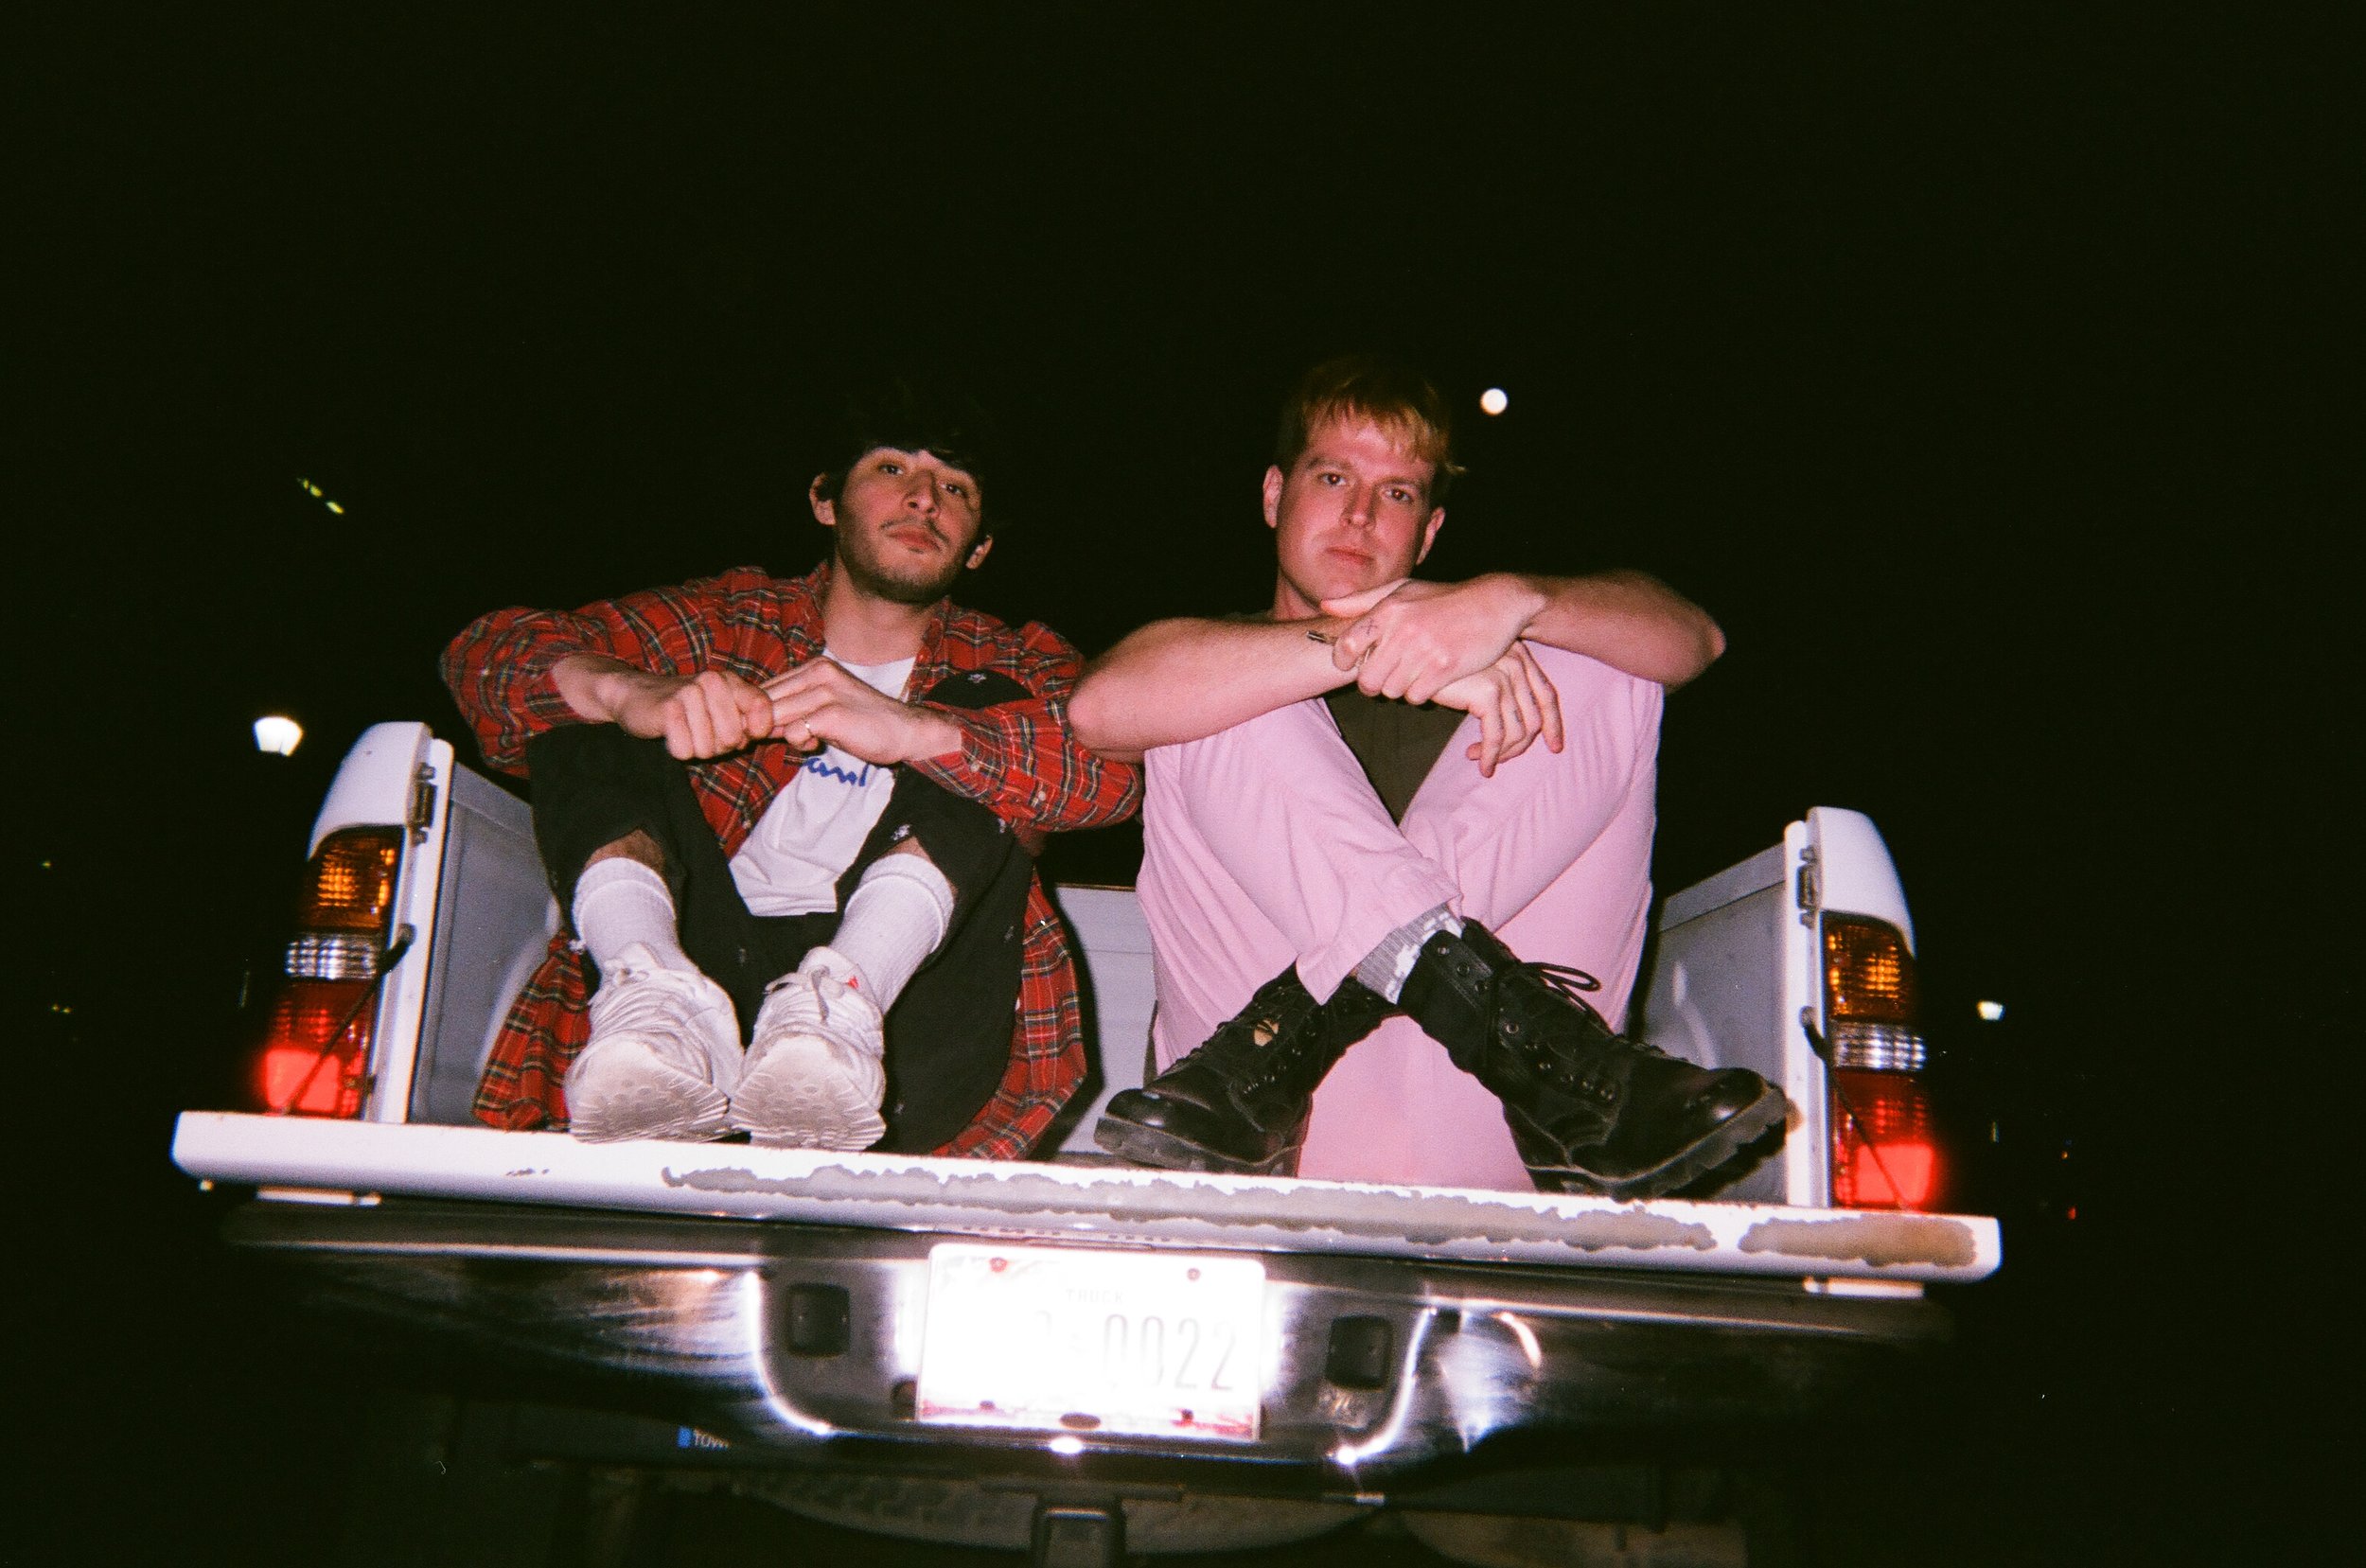  Dylan and myself in the back of the truck we drove around in for SXSW. Can’t wait til next year. 